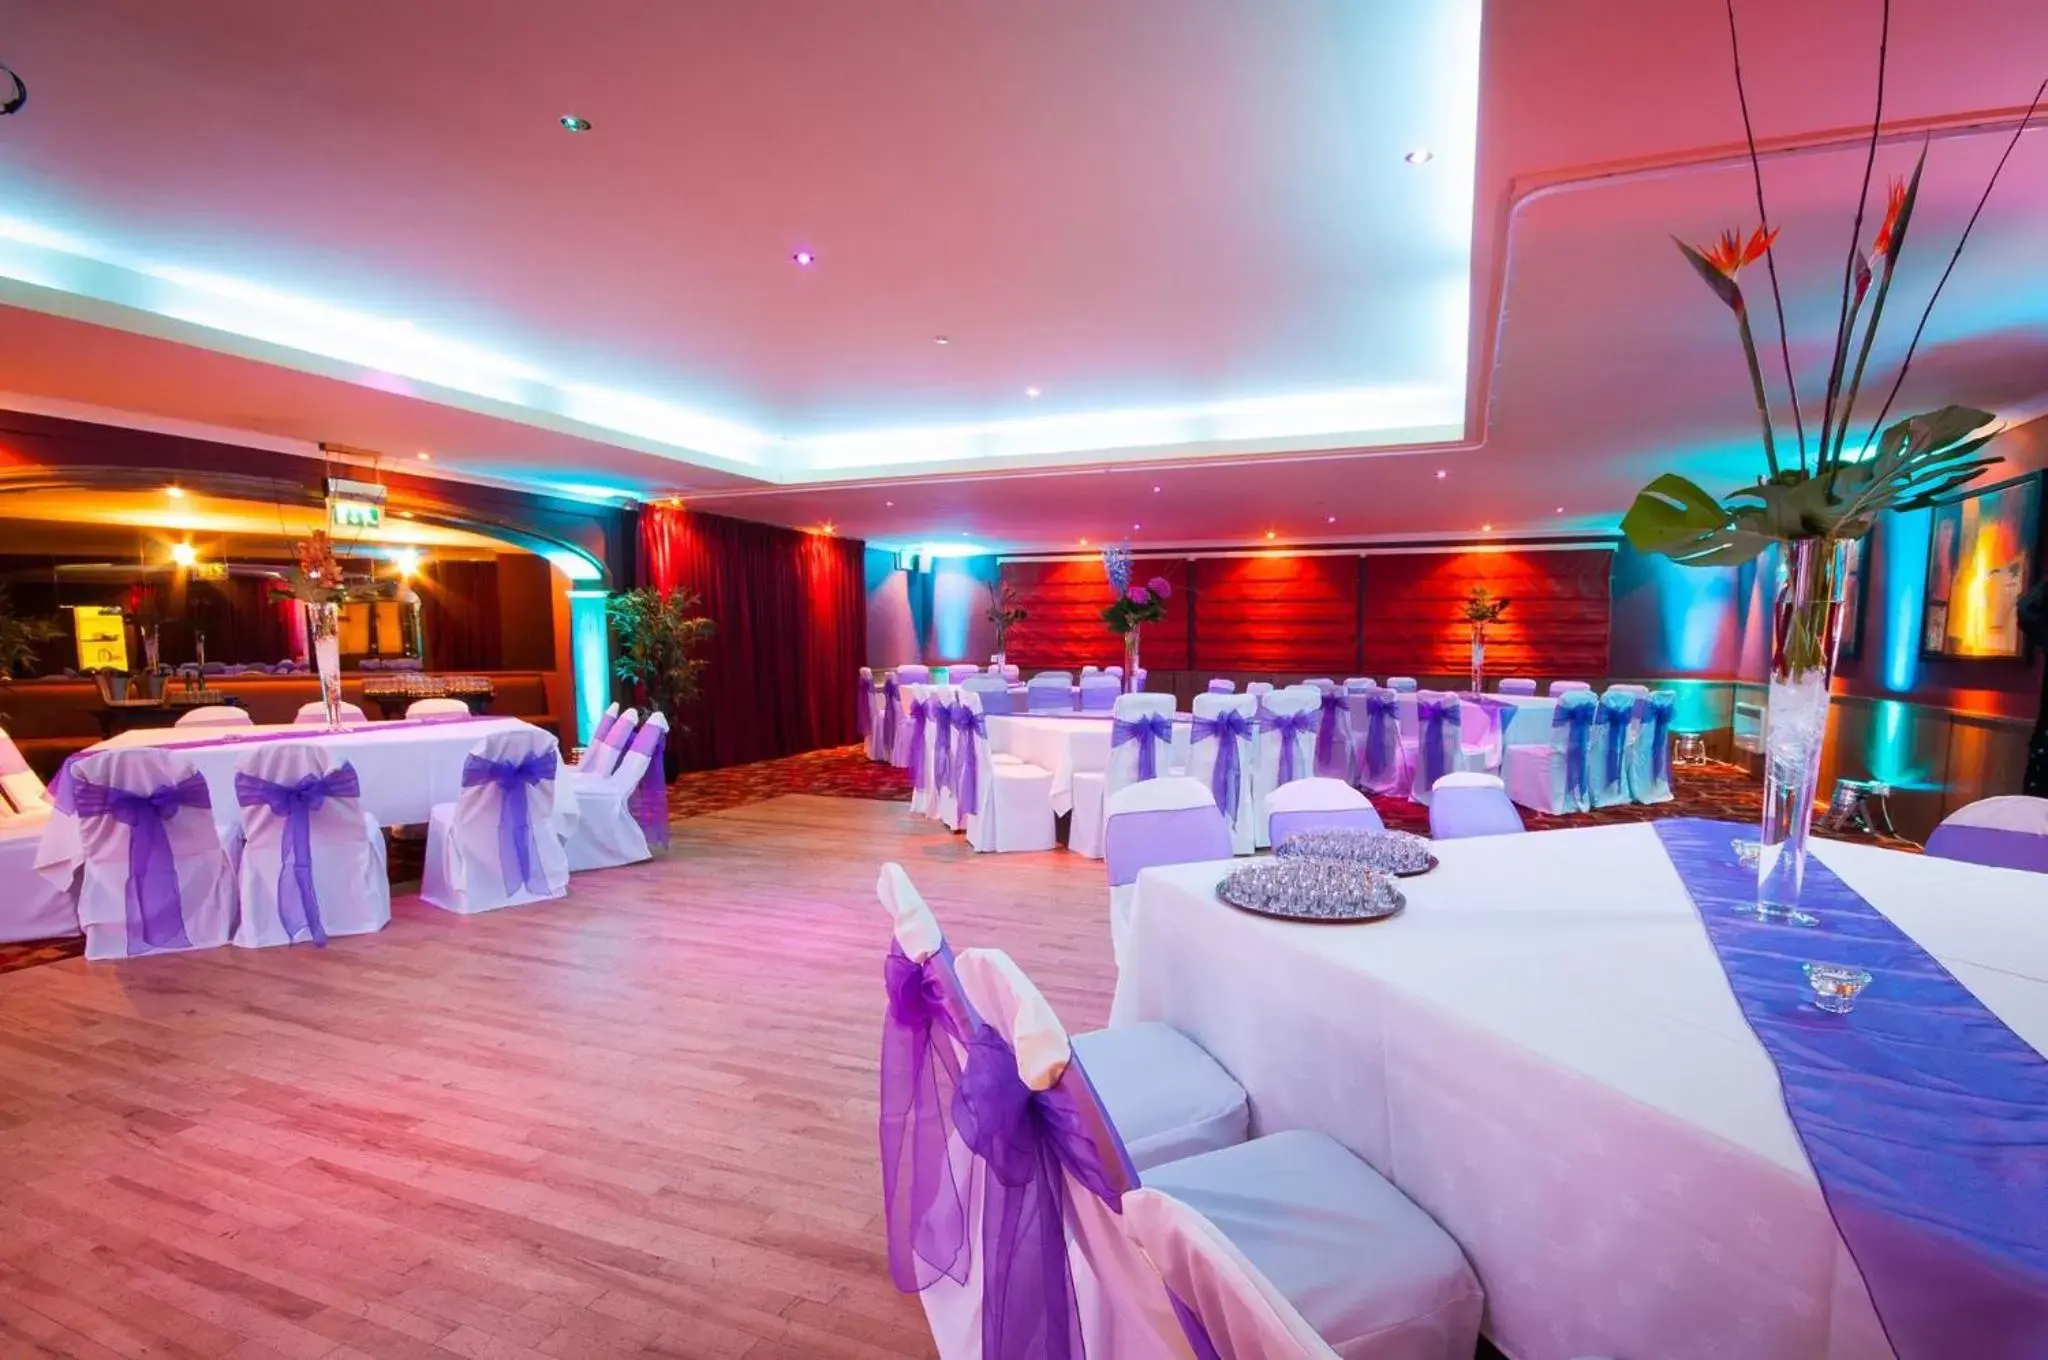 Banquet/Function facilities, Banquet Facilities in Ravelston House